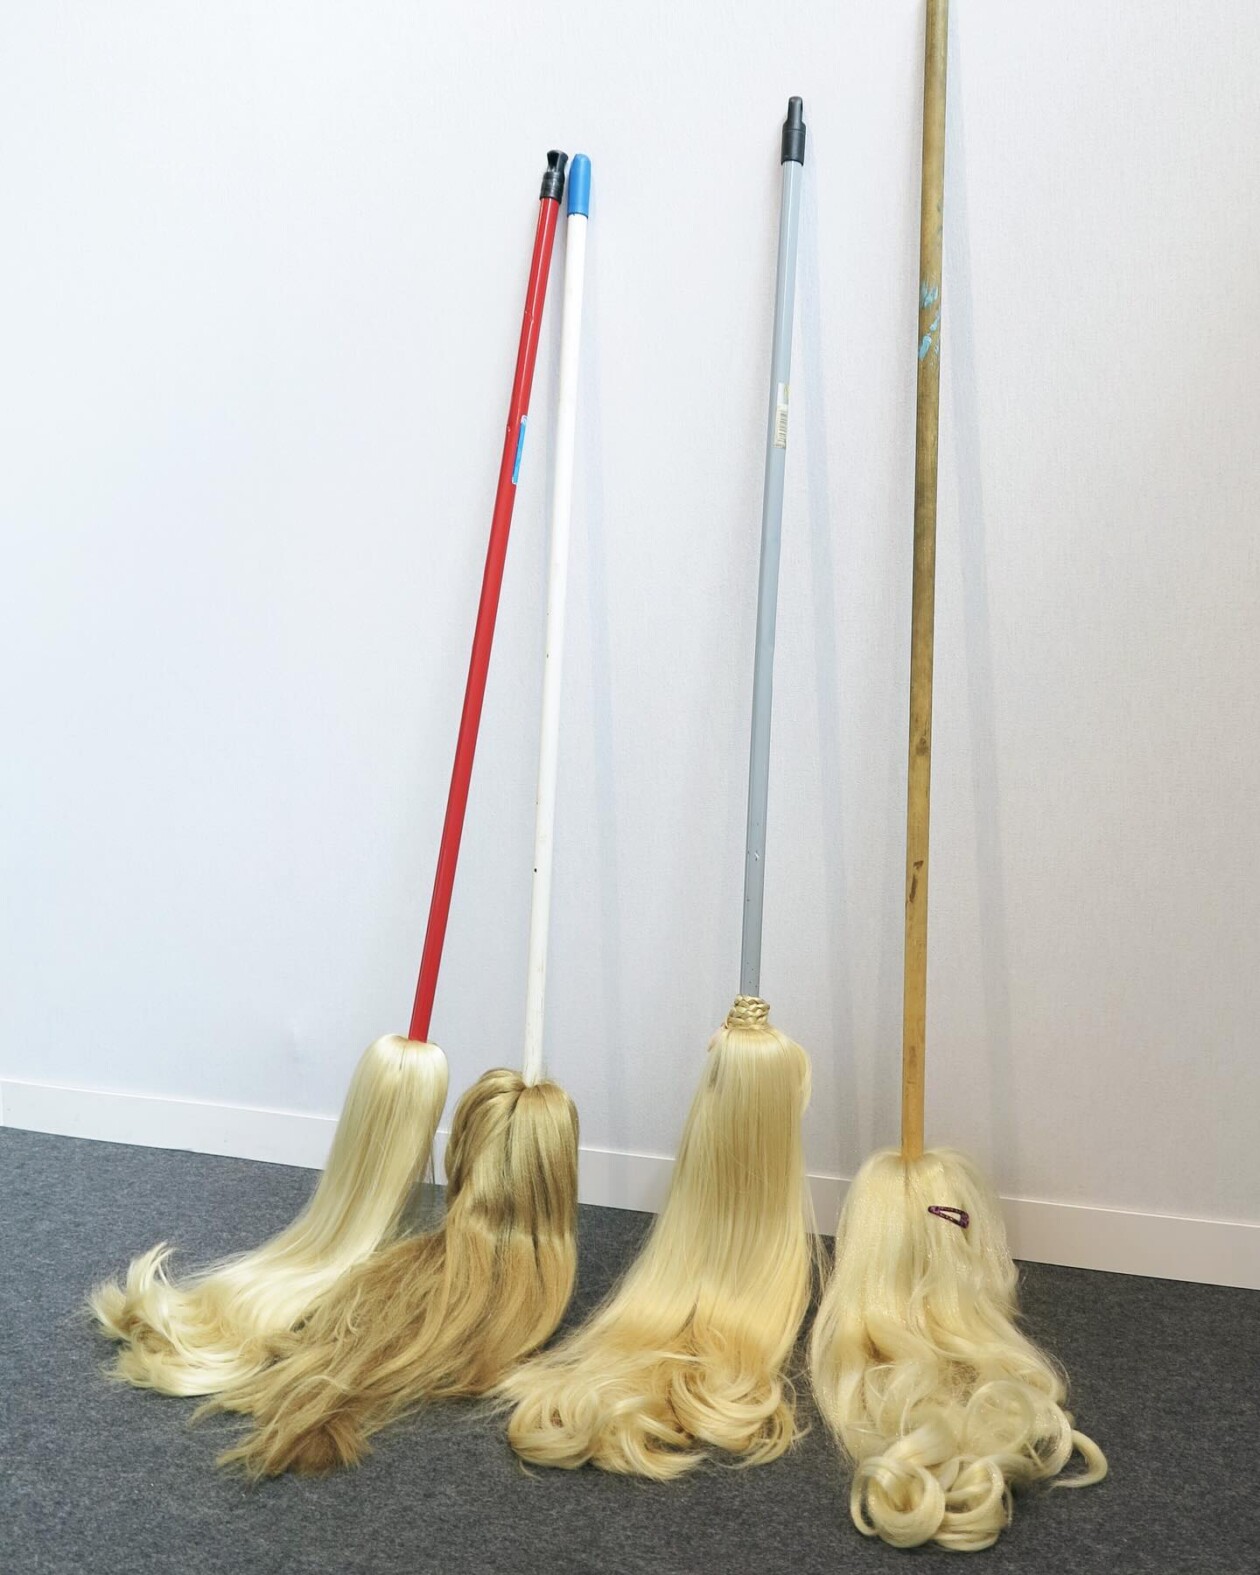 After The Waves (the Waifs) Surreal Sculptures Of Brooms With Human Hairs By Vincent Olinet (1)